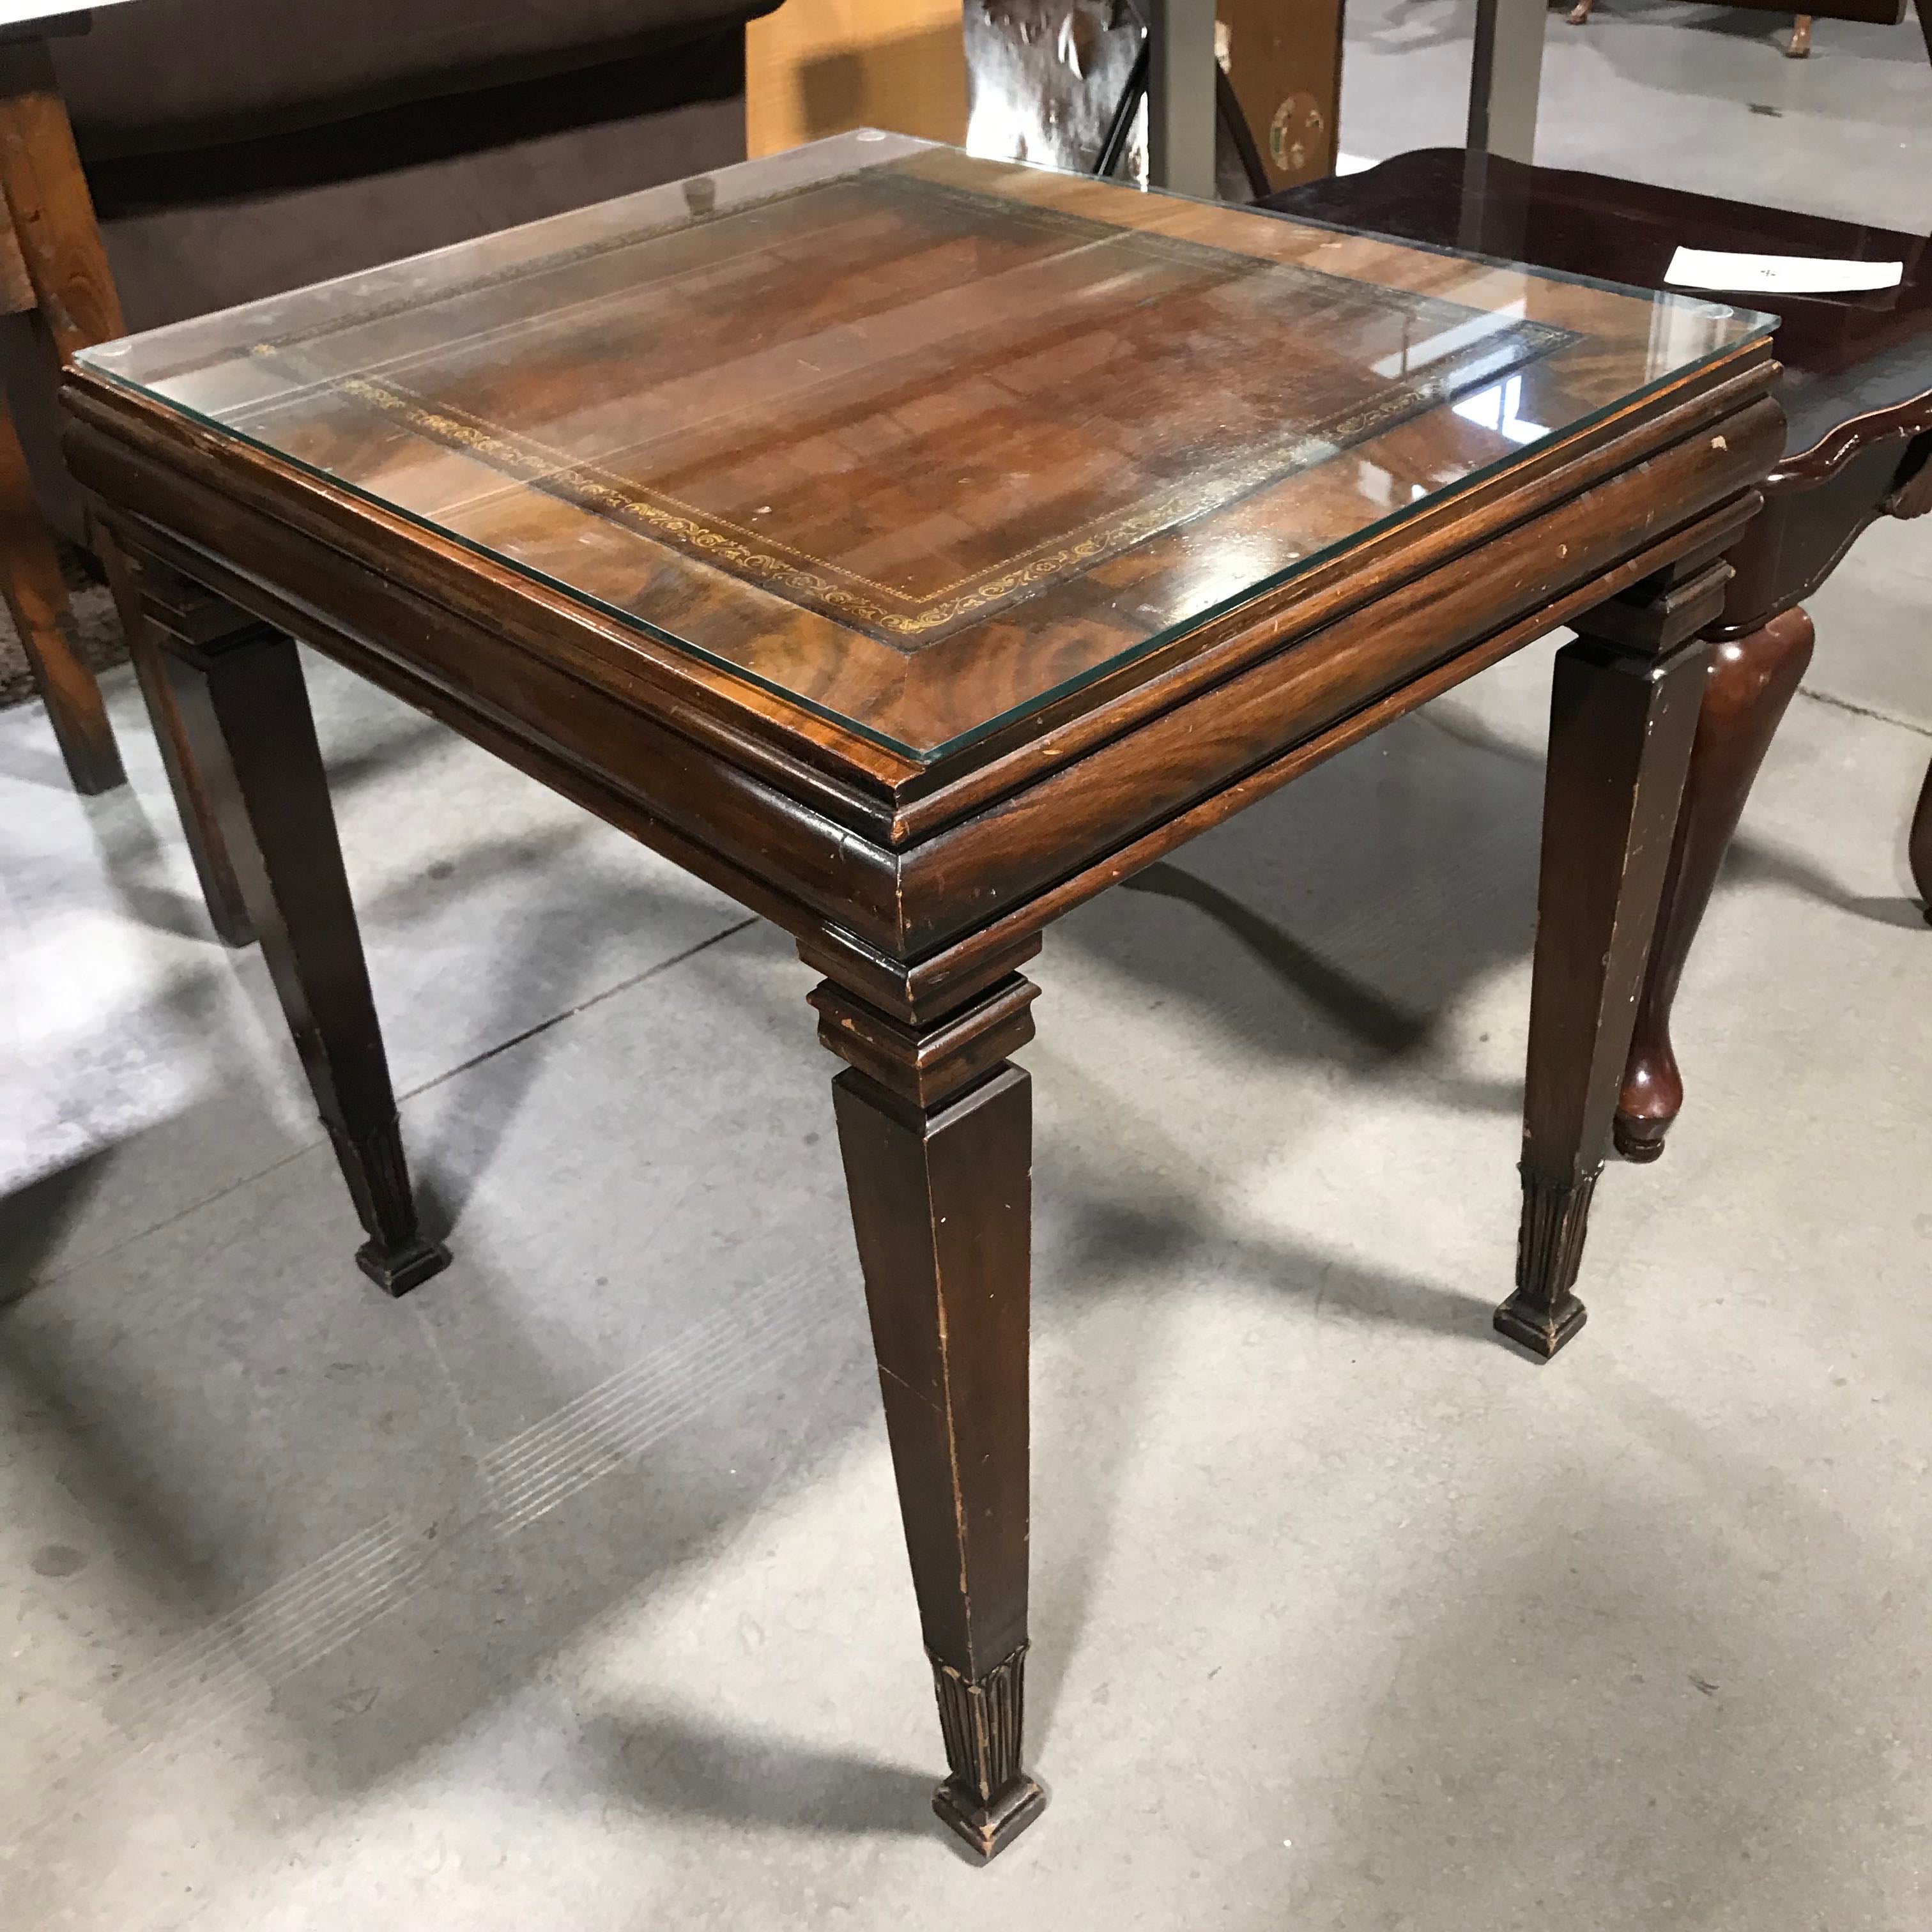 Glass Top with Leather Inset Accent Table